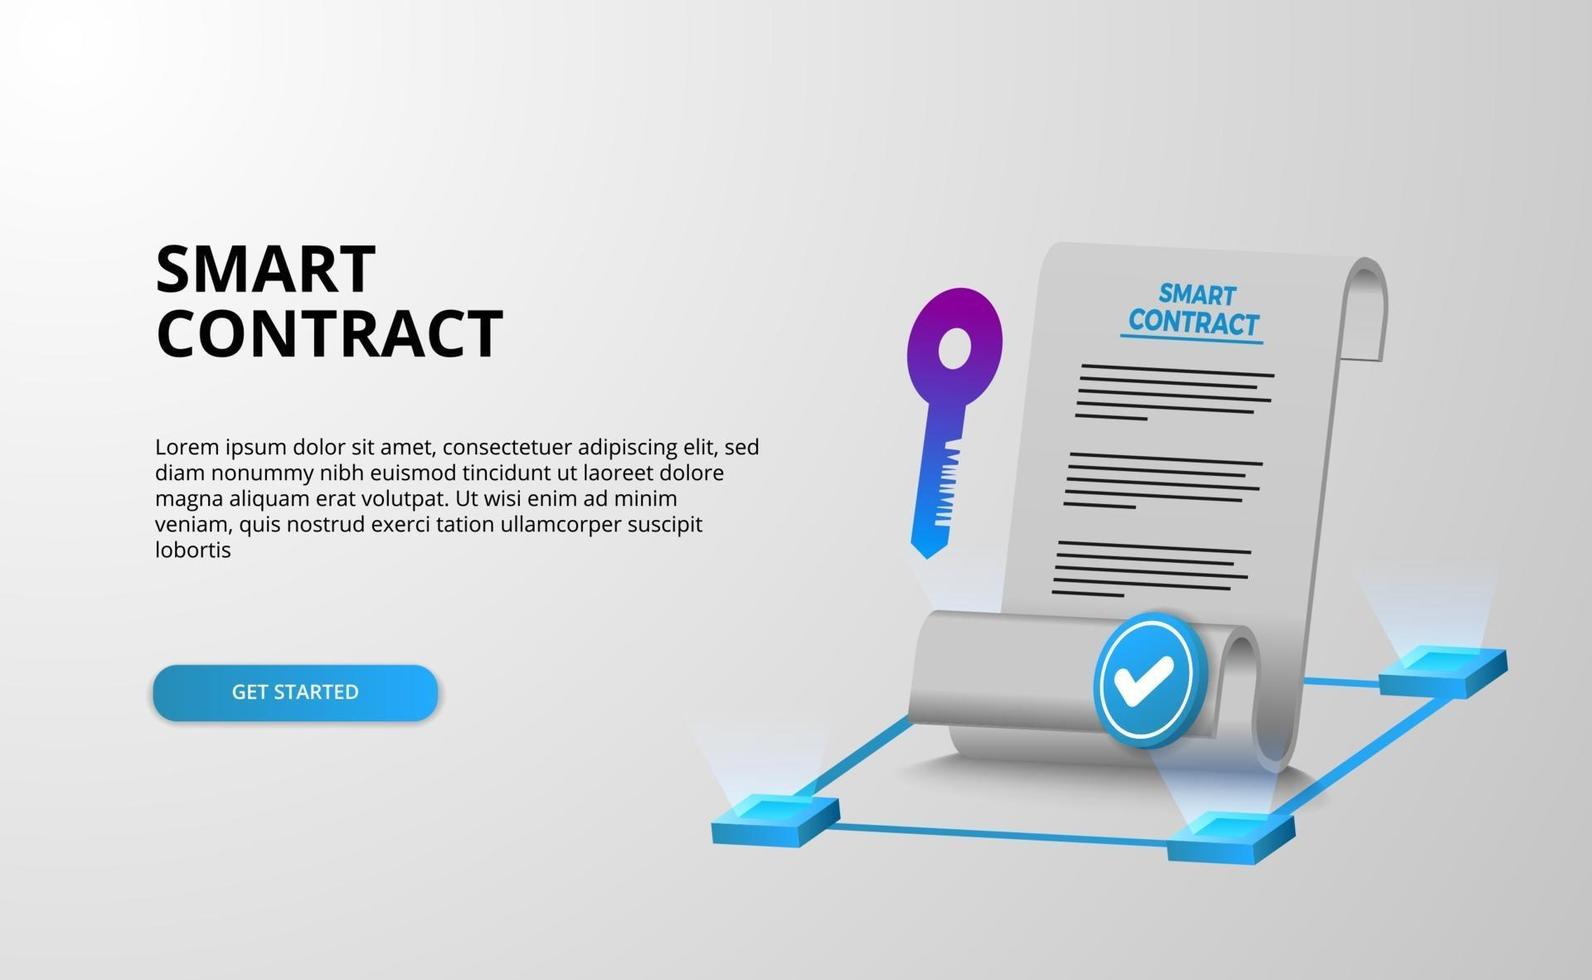 Digital smart contract for electronic sign document agreement security, finance, legal corporate. Paper document and key security protection vector